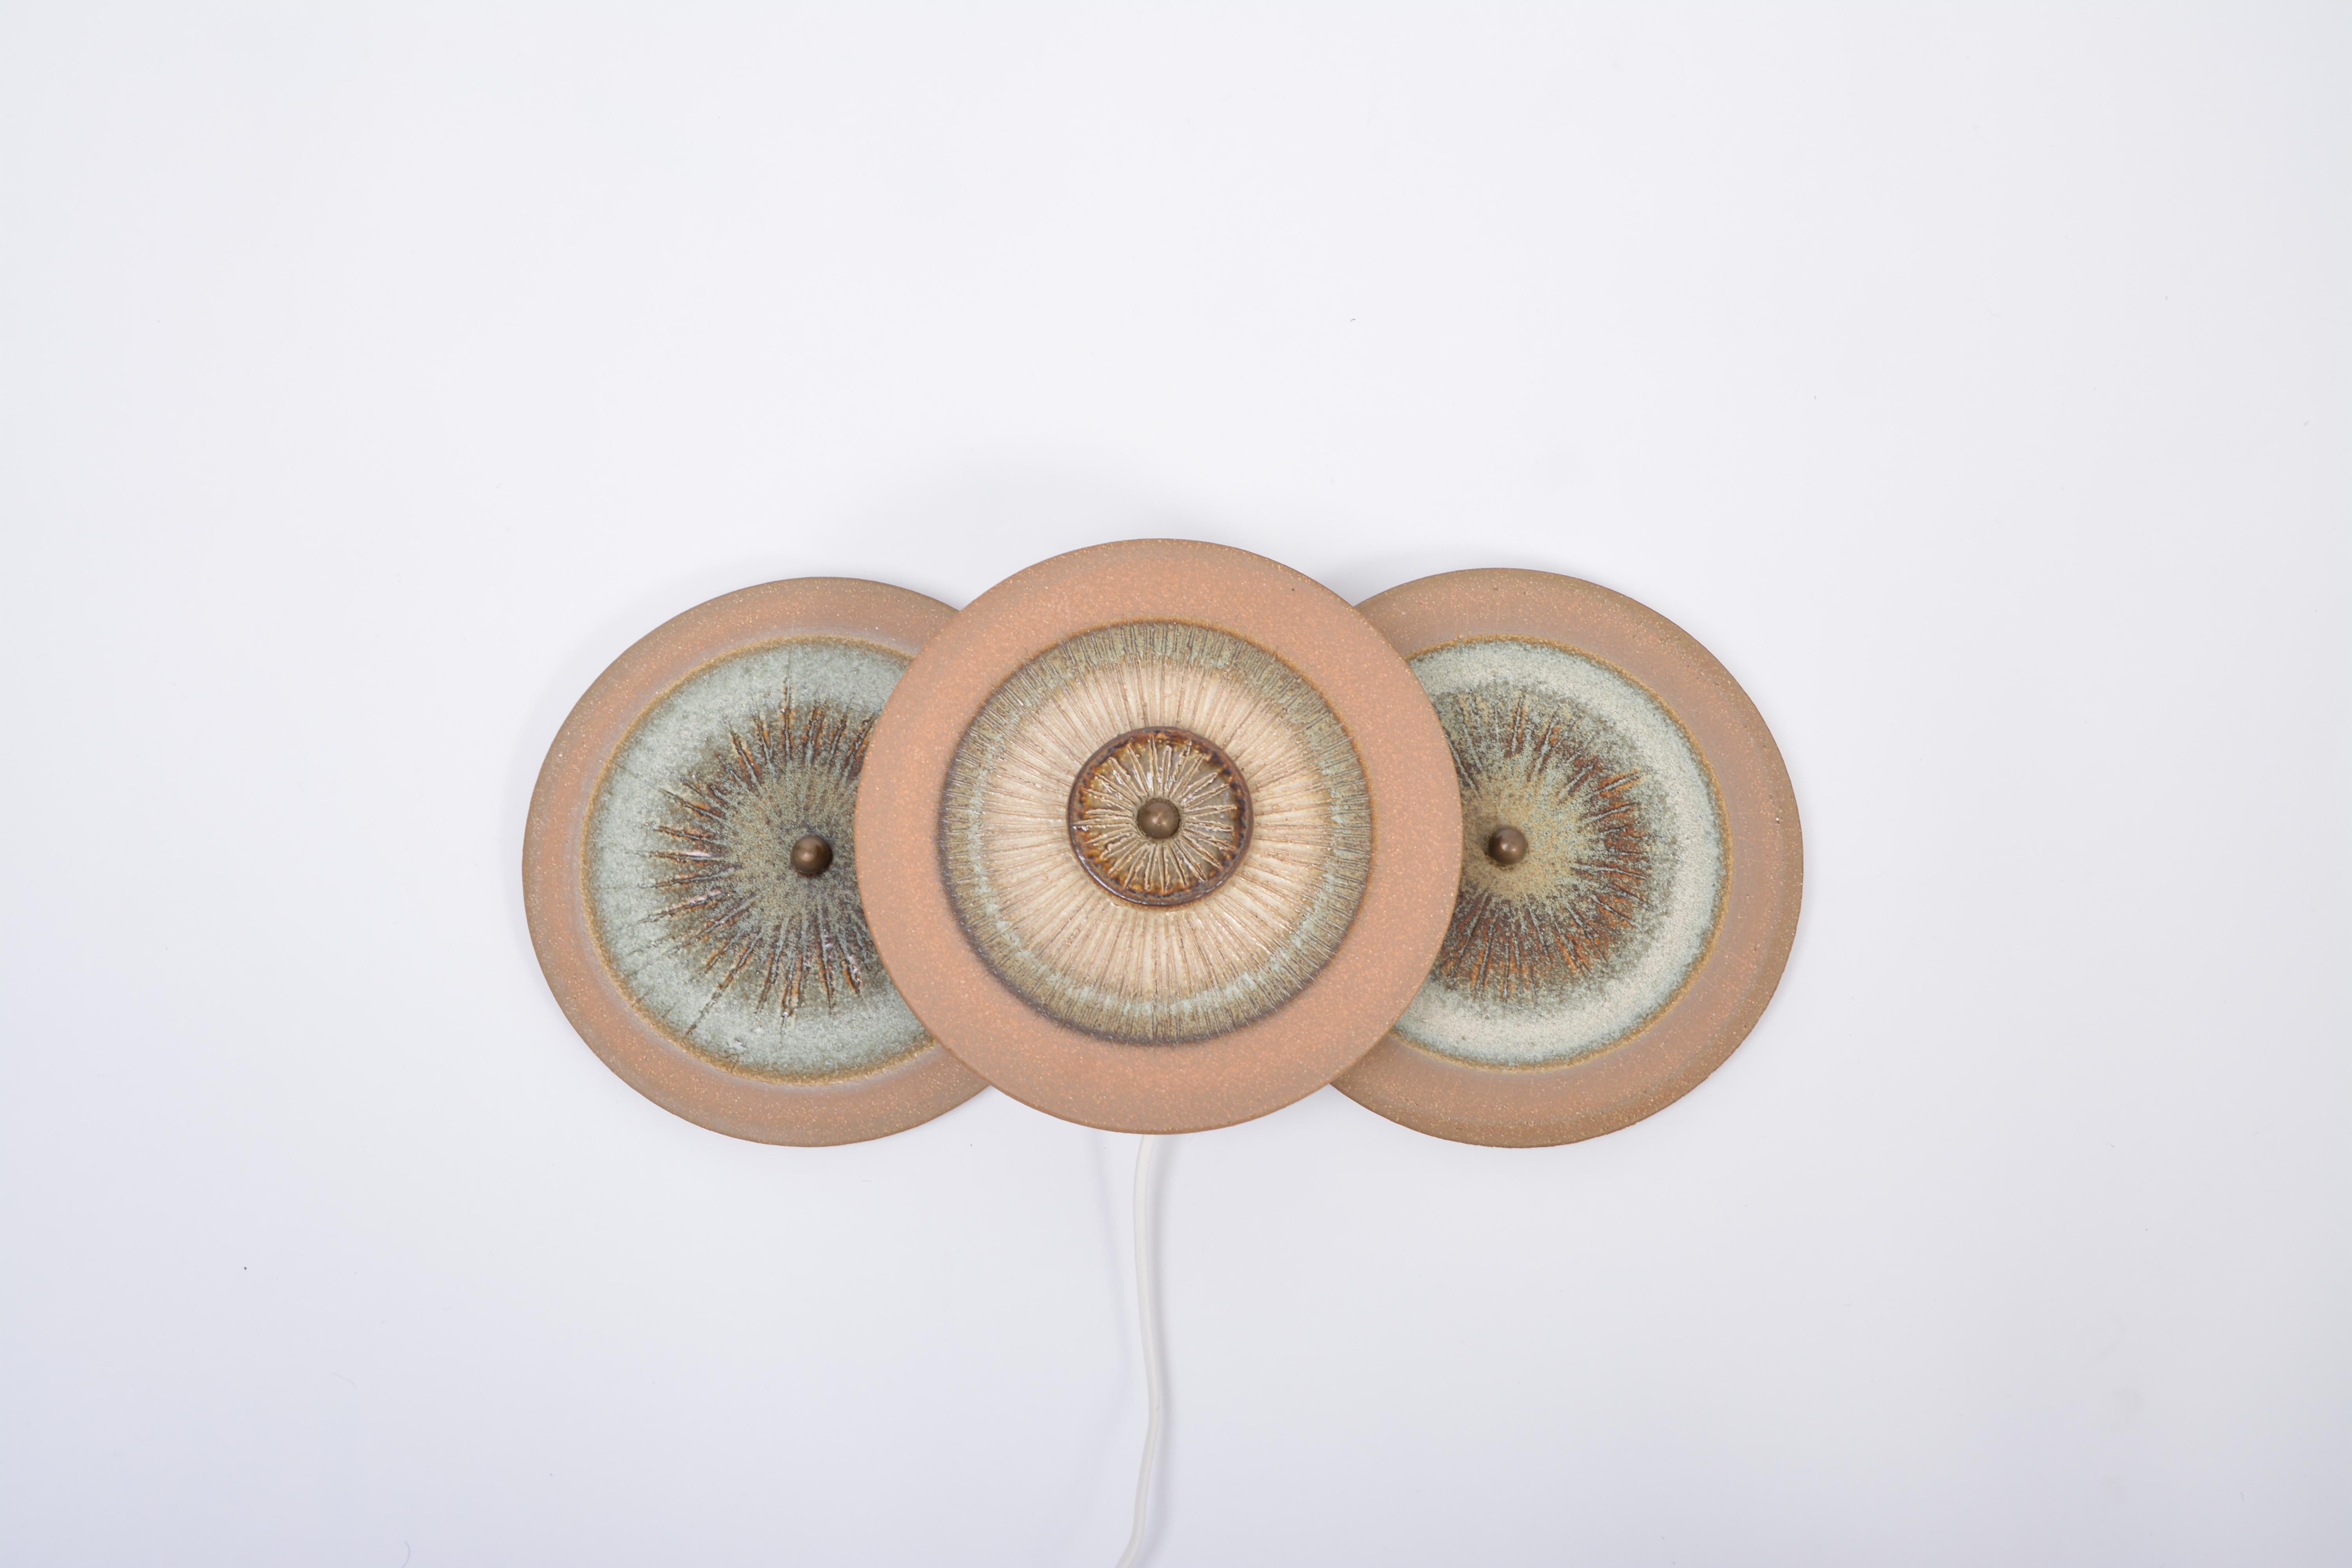 A stunning wall light designed by Noomi Backhausen and Poul Brandborg and produced by Soholm/Denmark in the 1960s. The wall lamp is made from glazed stoneware in the typical style of 1960s Danish ceramics. Equally beautiful in daylight or lit at